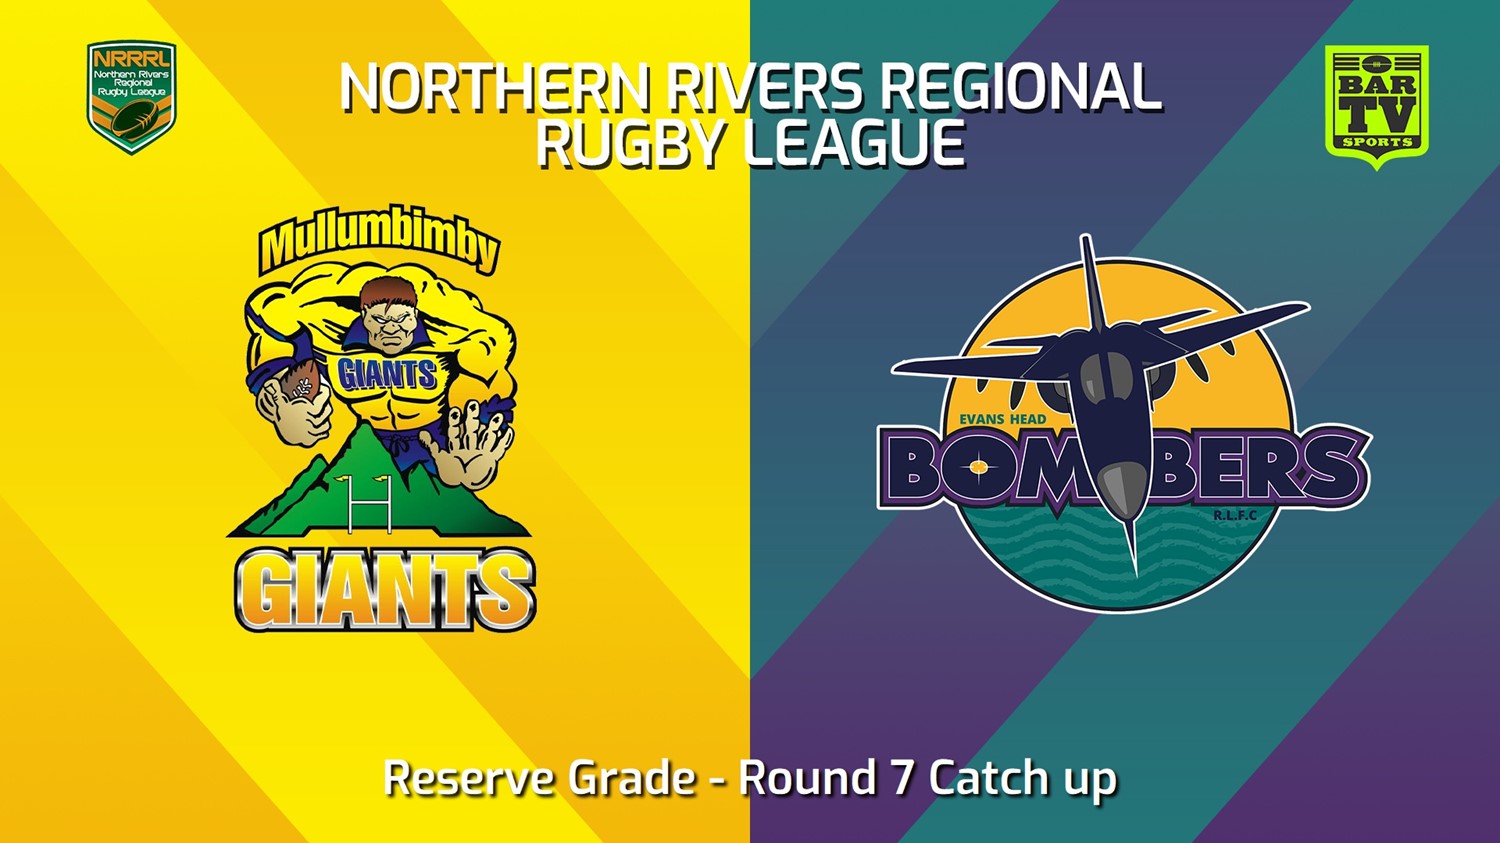 240606-video-Northern Rivers Round 7 Catch up - Reserve Grade - Mullumbimby Giants v Evans Head Bombers Slate Image